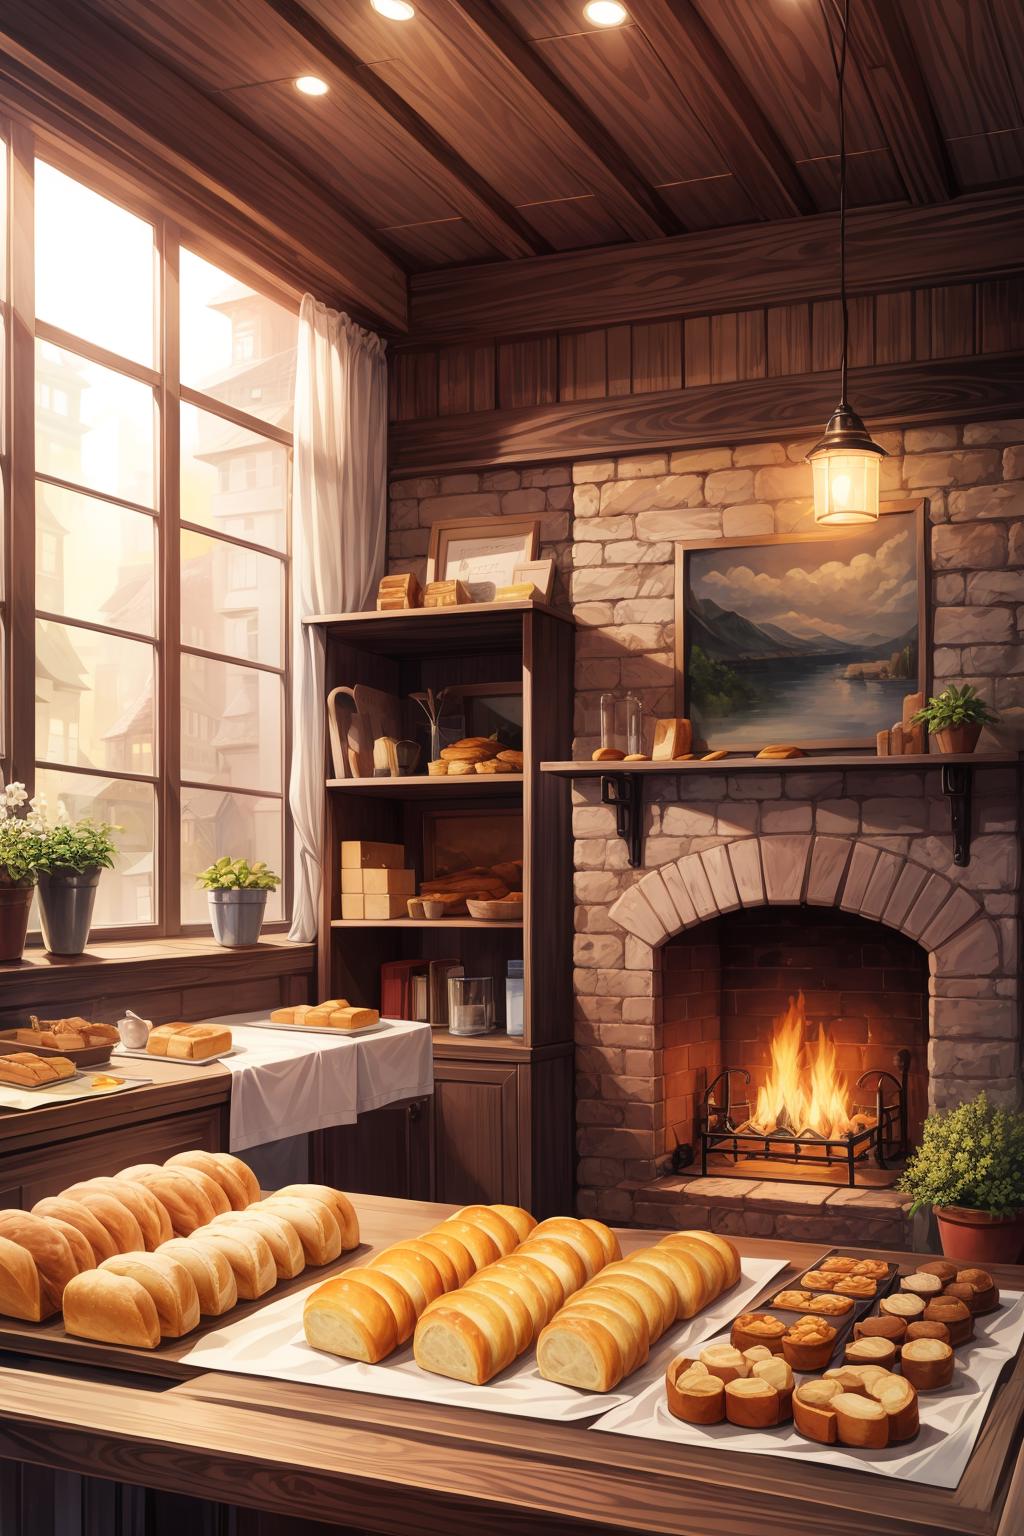 🧁☕️Bakery backgrounds in anime🧁☕️ | Anime Amino